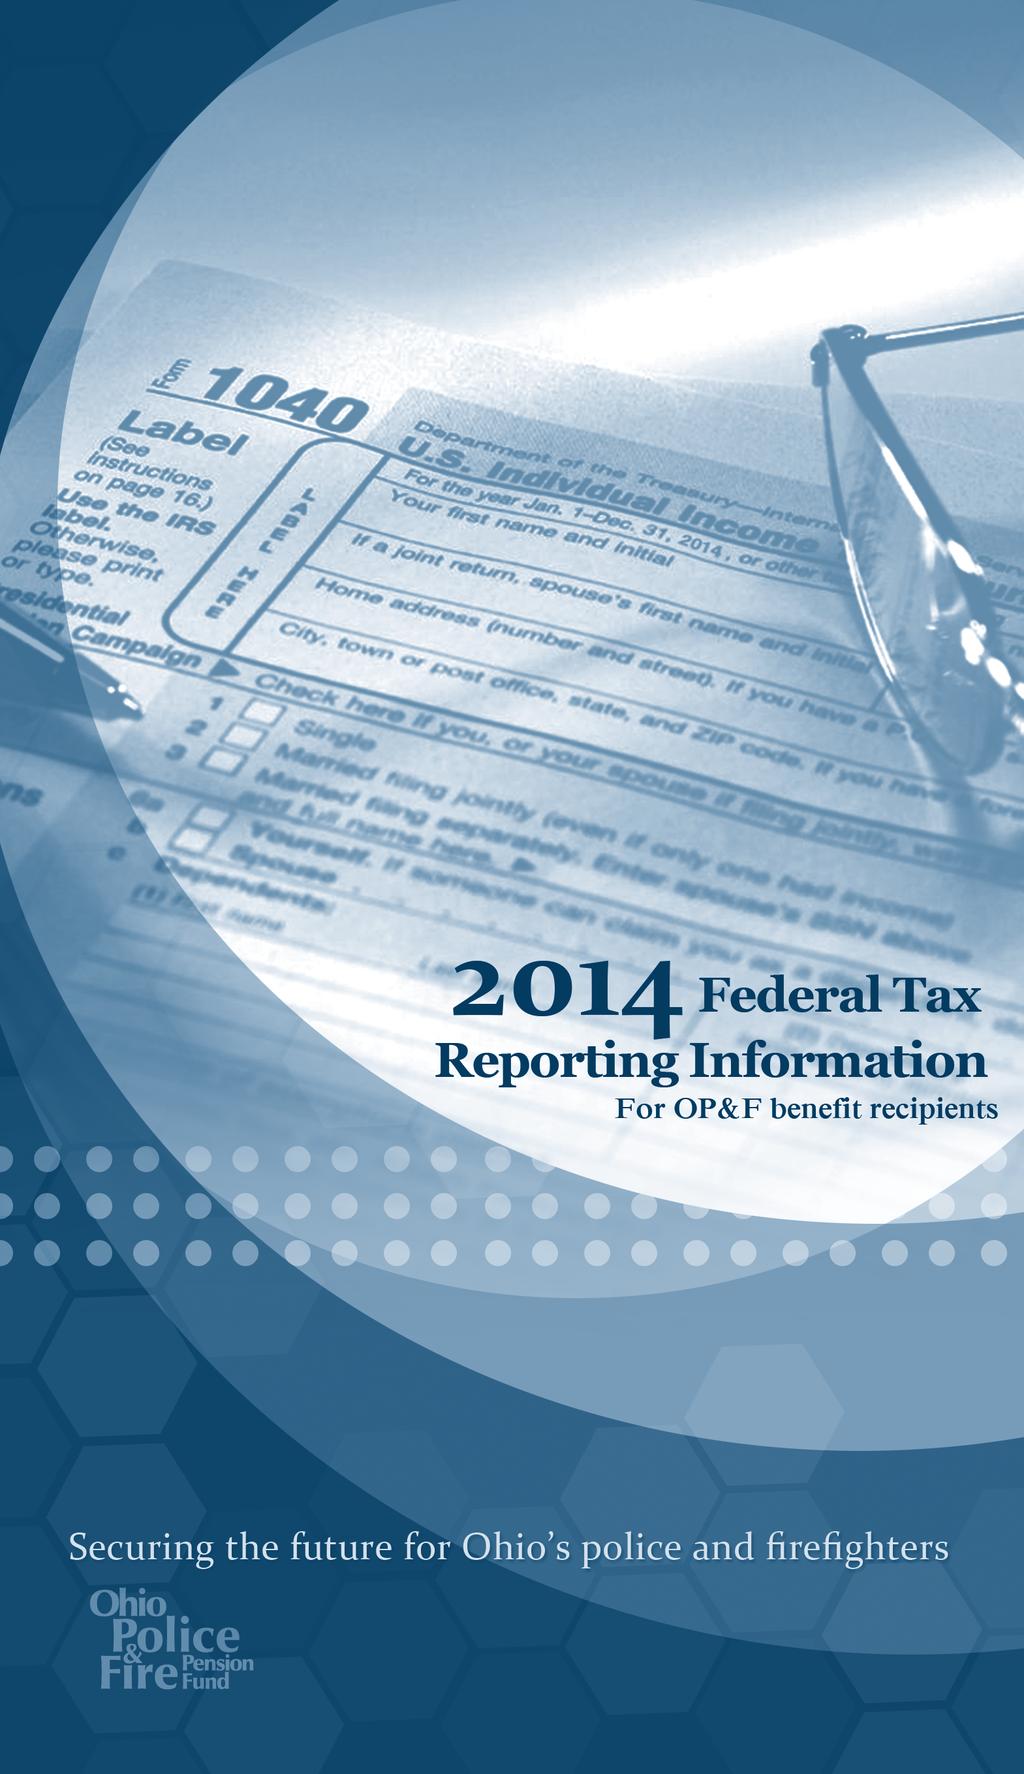 Federal Tax Reporting Information